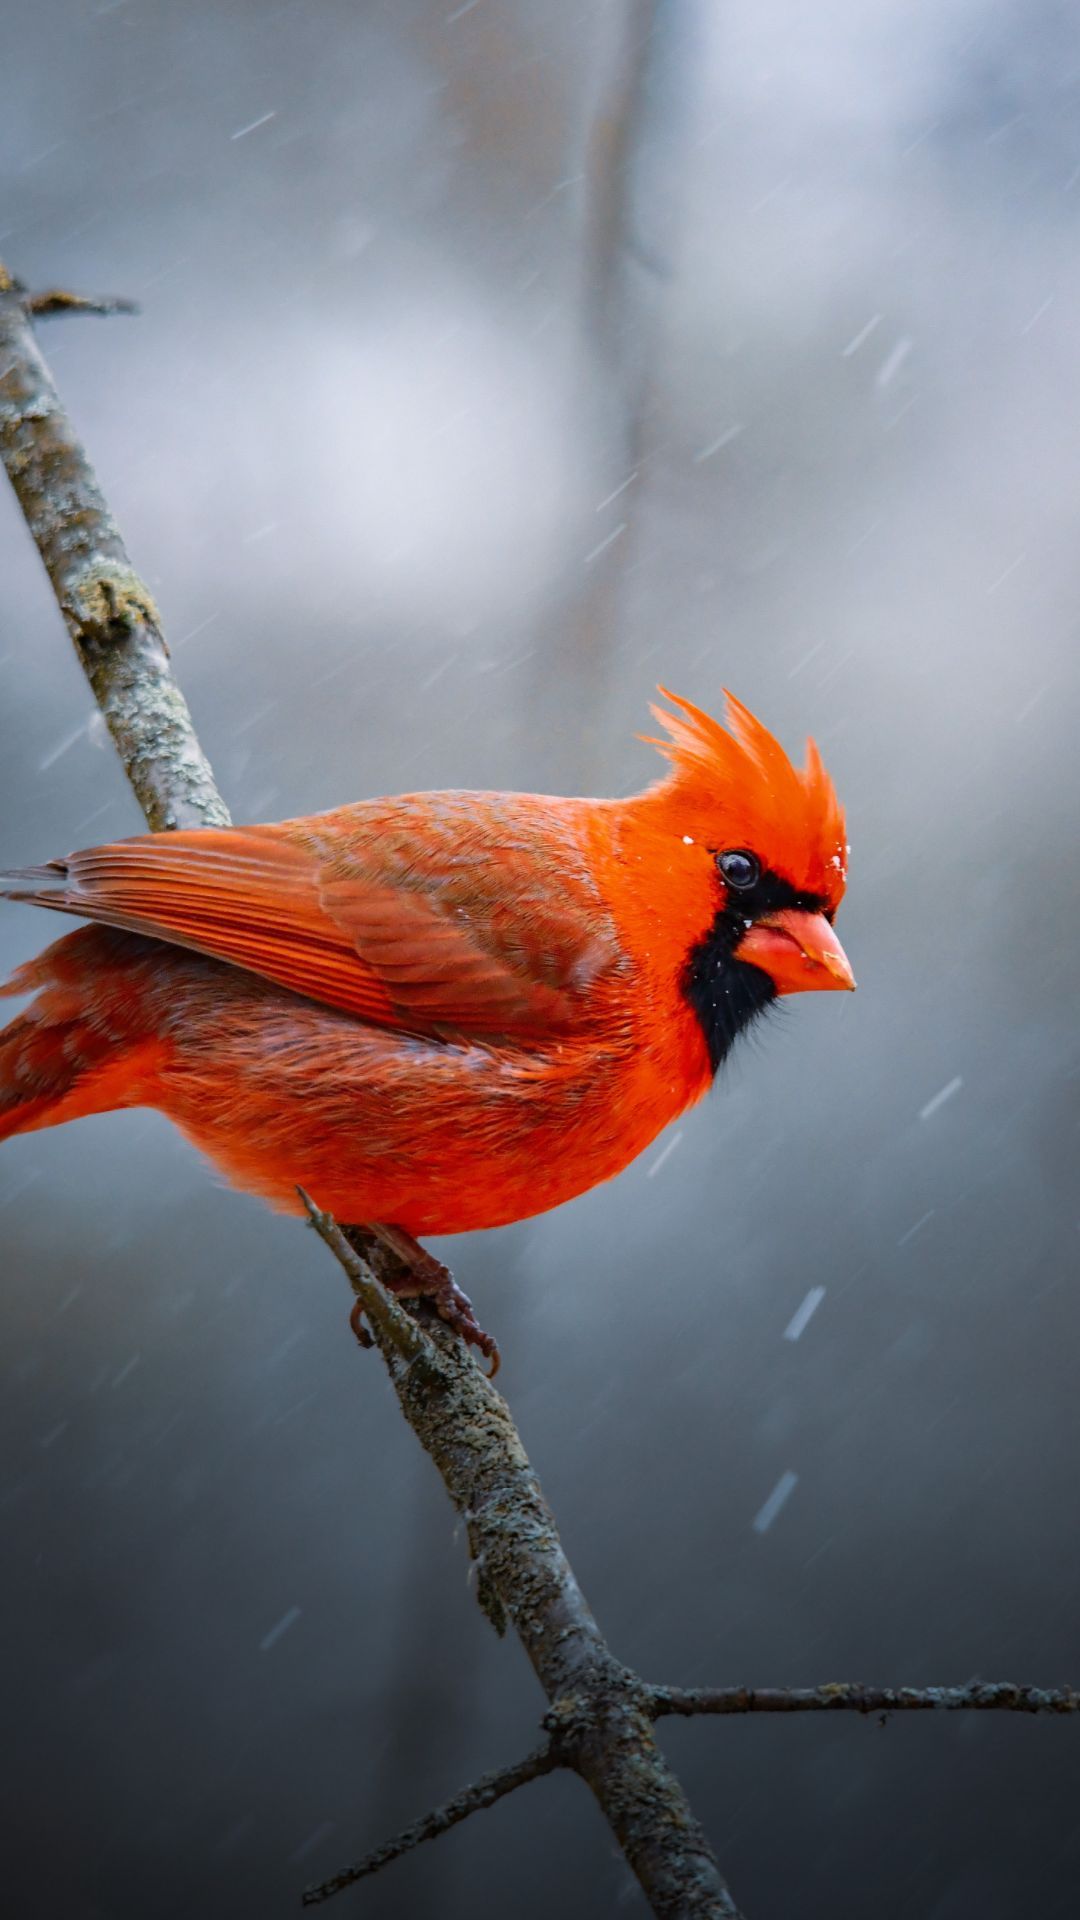 A red bird sitting on the branch of tree - 